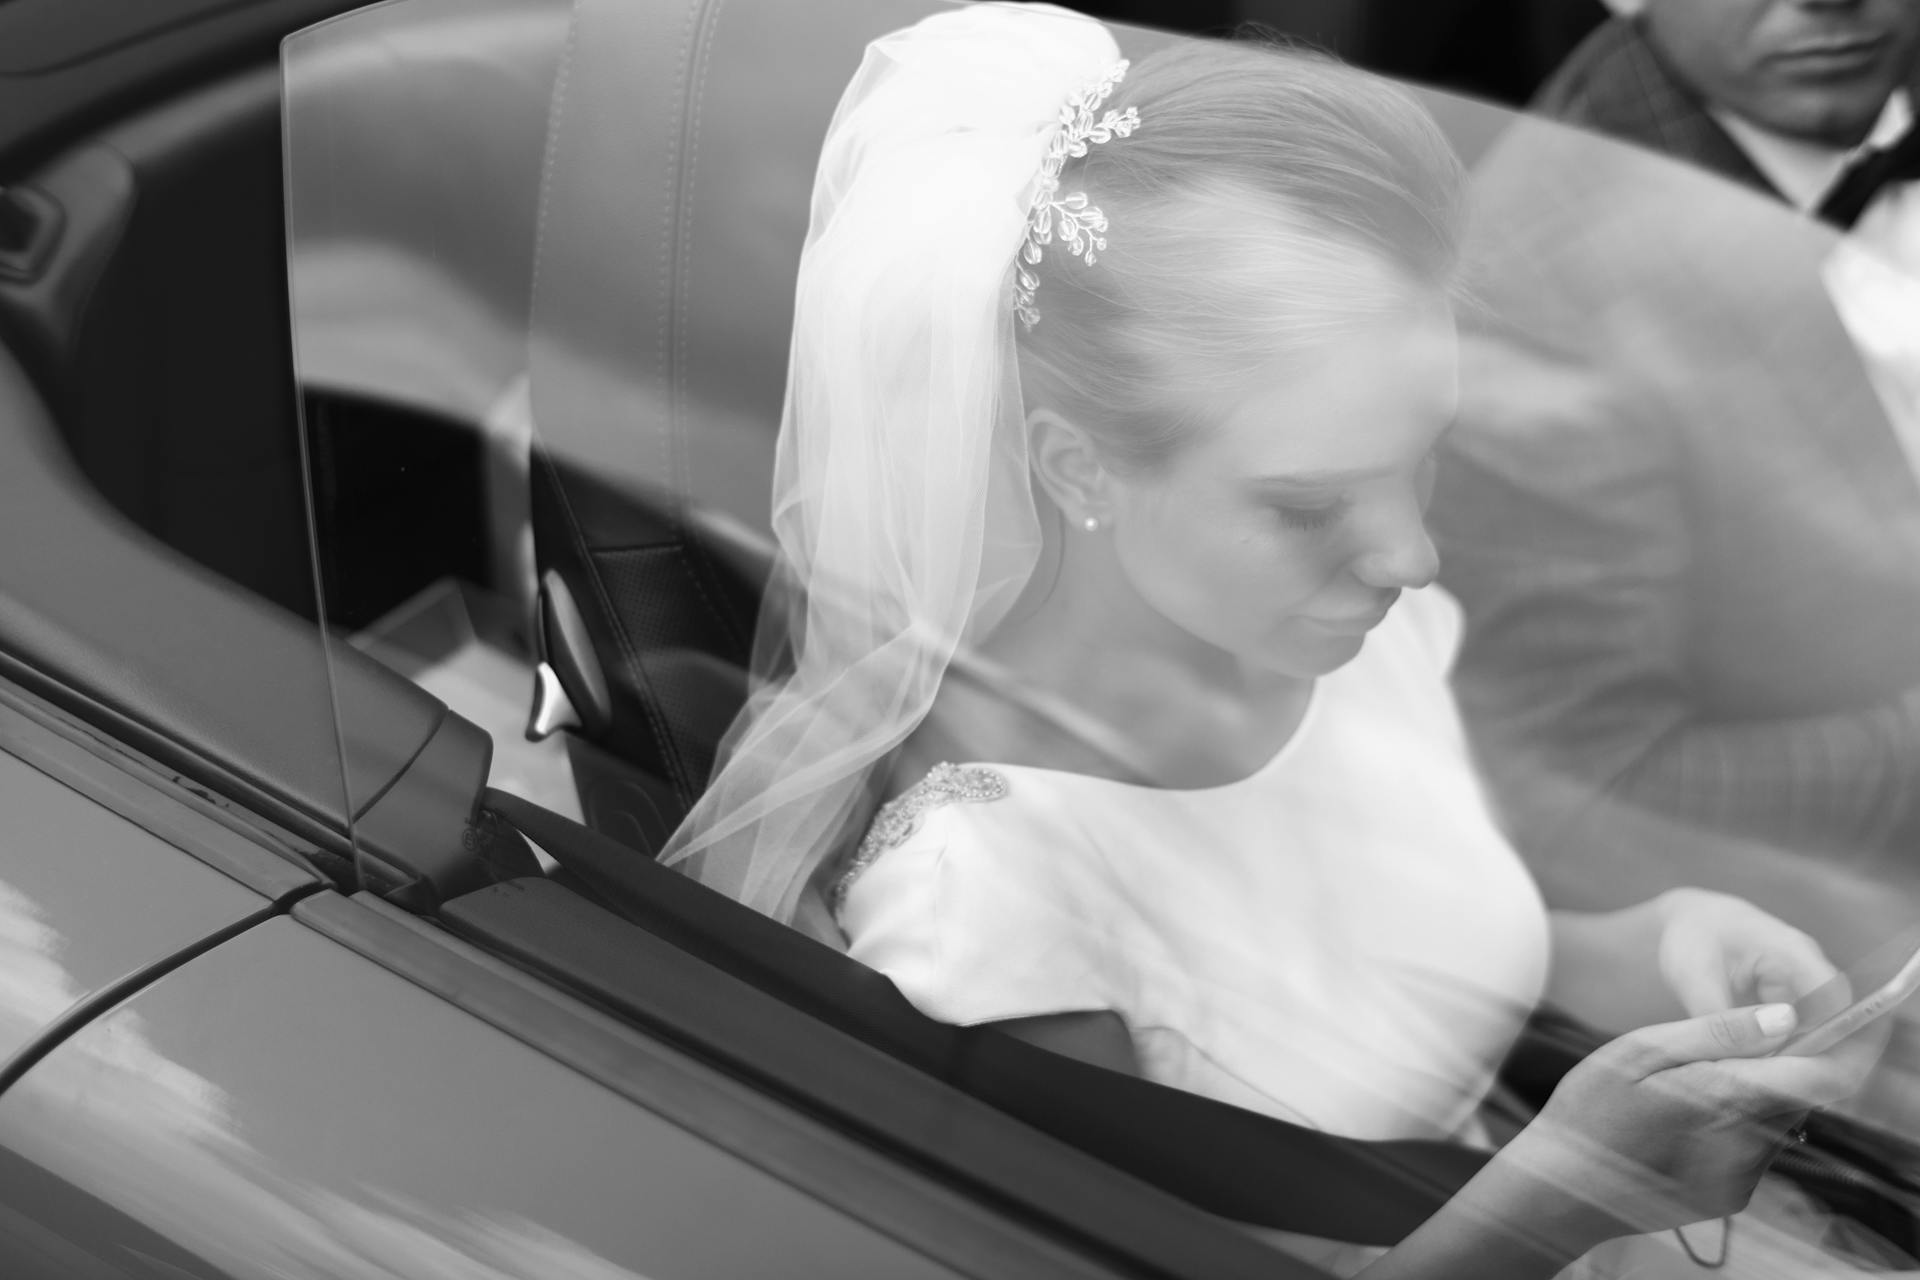 A bride and groom sitting in a car | Source: Pexels